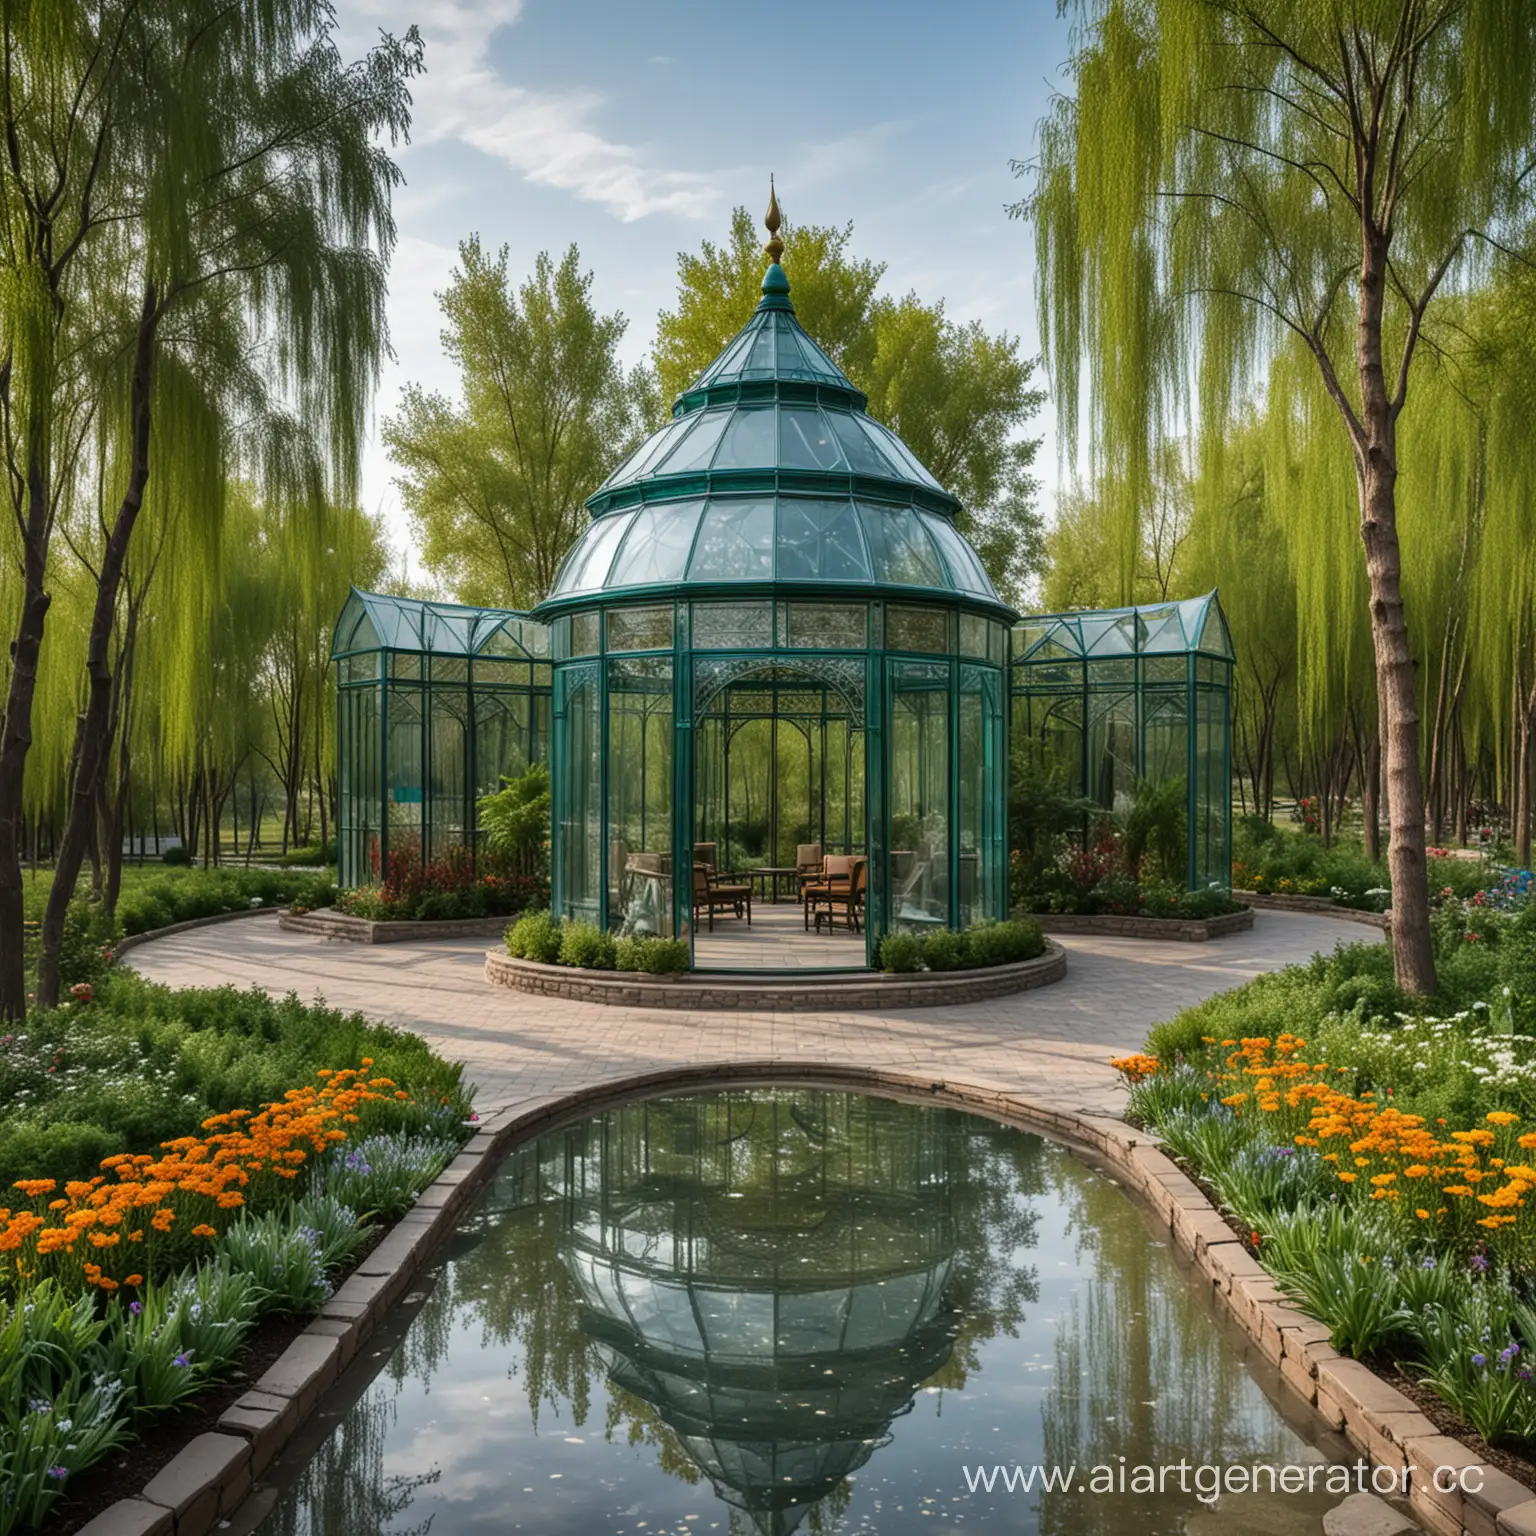 It’s a big  glass garden like a pavilion with lots of plants. It has aspects of Kazakh culture and there are places for meeting, master class and exhibition 